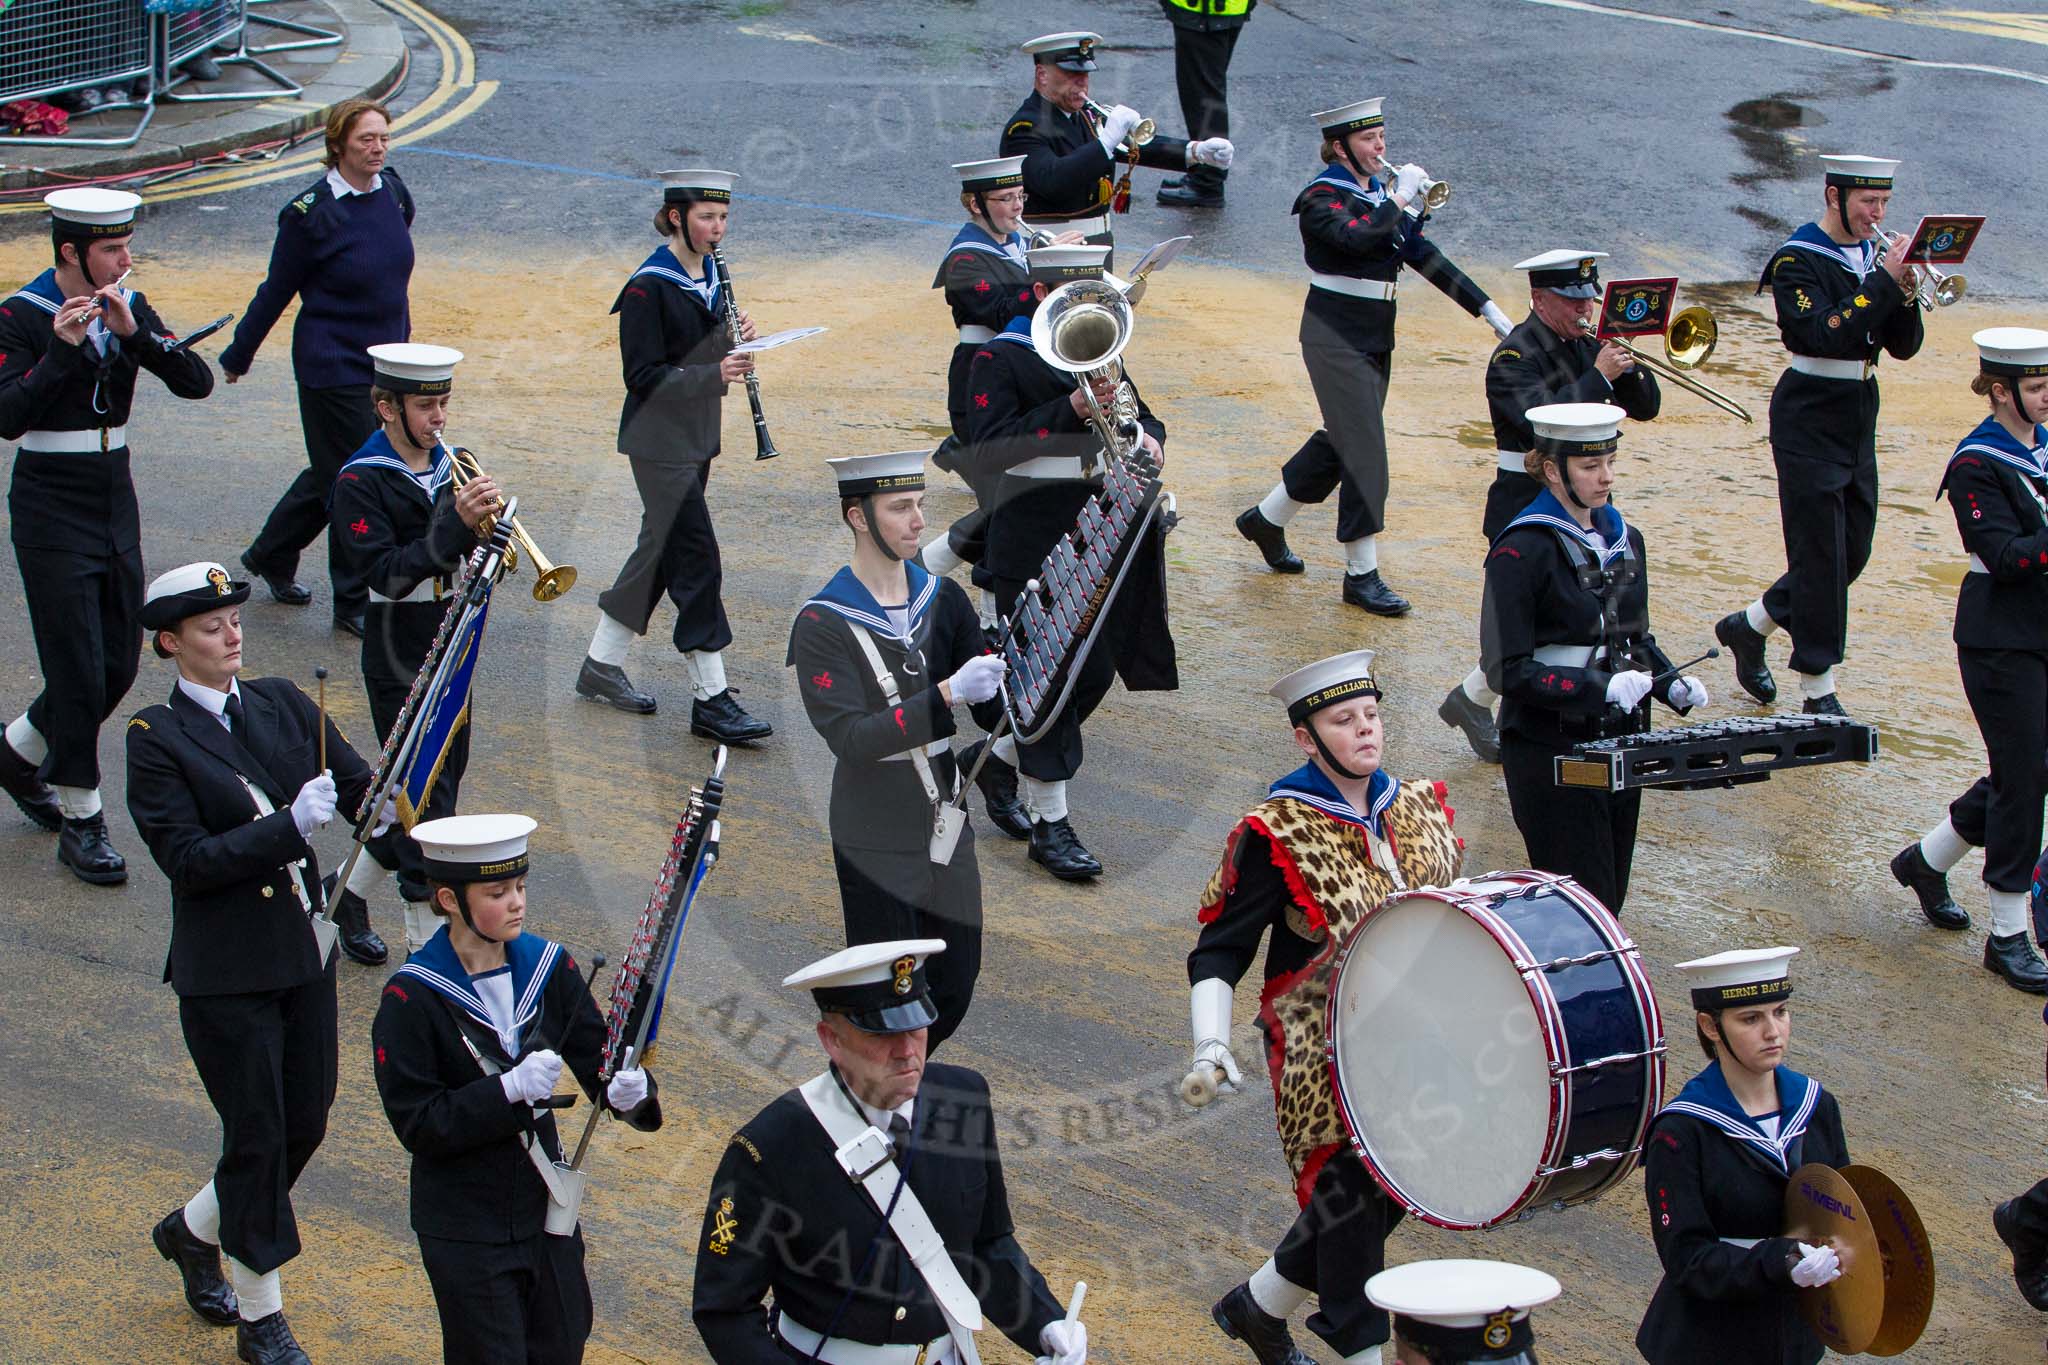 Lord Mayor's Show 2012: Entry 98 - Sea Cadet Corps Band..
Press stand opposite Mansion House, City of London,
London,
Greater London,
United Kingdom,
on 10 November 2012 at 11:45, image #1311